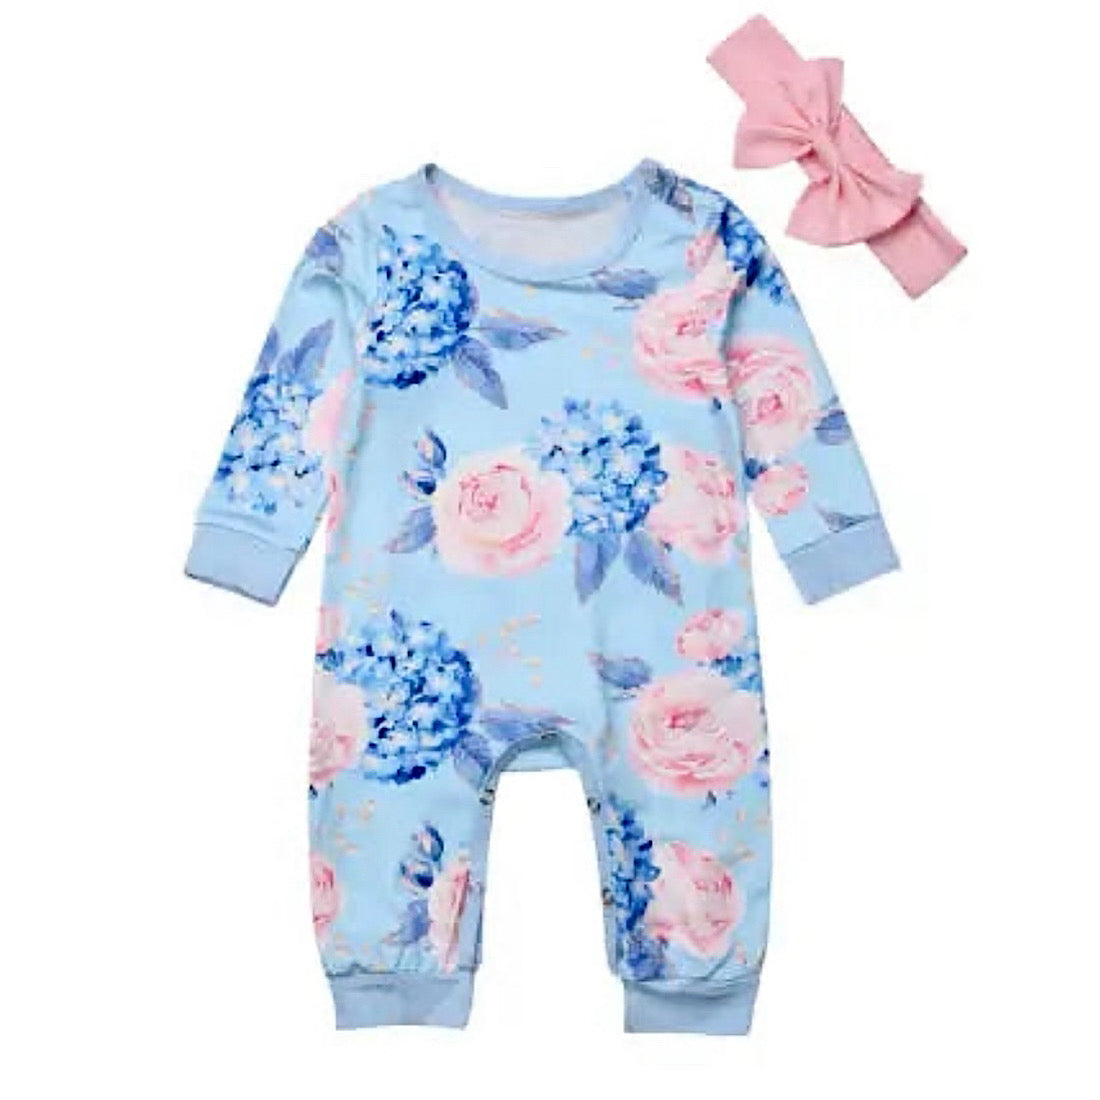 Baby Girls Blue Floral Print Long Sleeve Romper Jumpsuit with Bow, Main Image